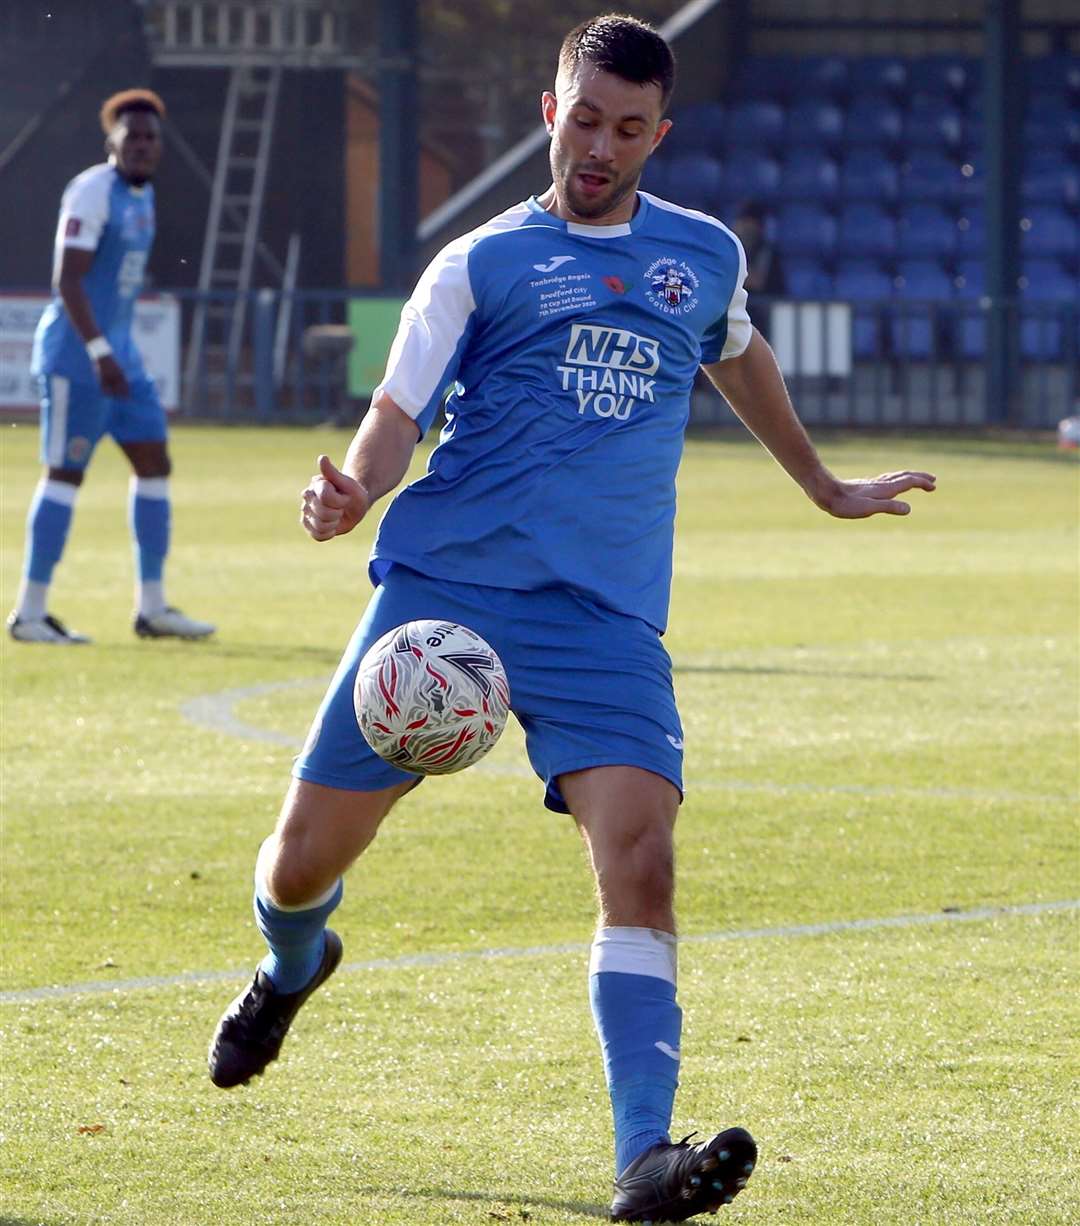 Player-coach Tom Parkinson has been among the Tonbridge players sidelined recently. Picture: Dave Couldridge